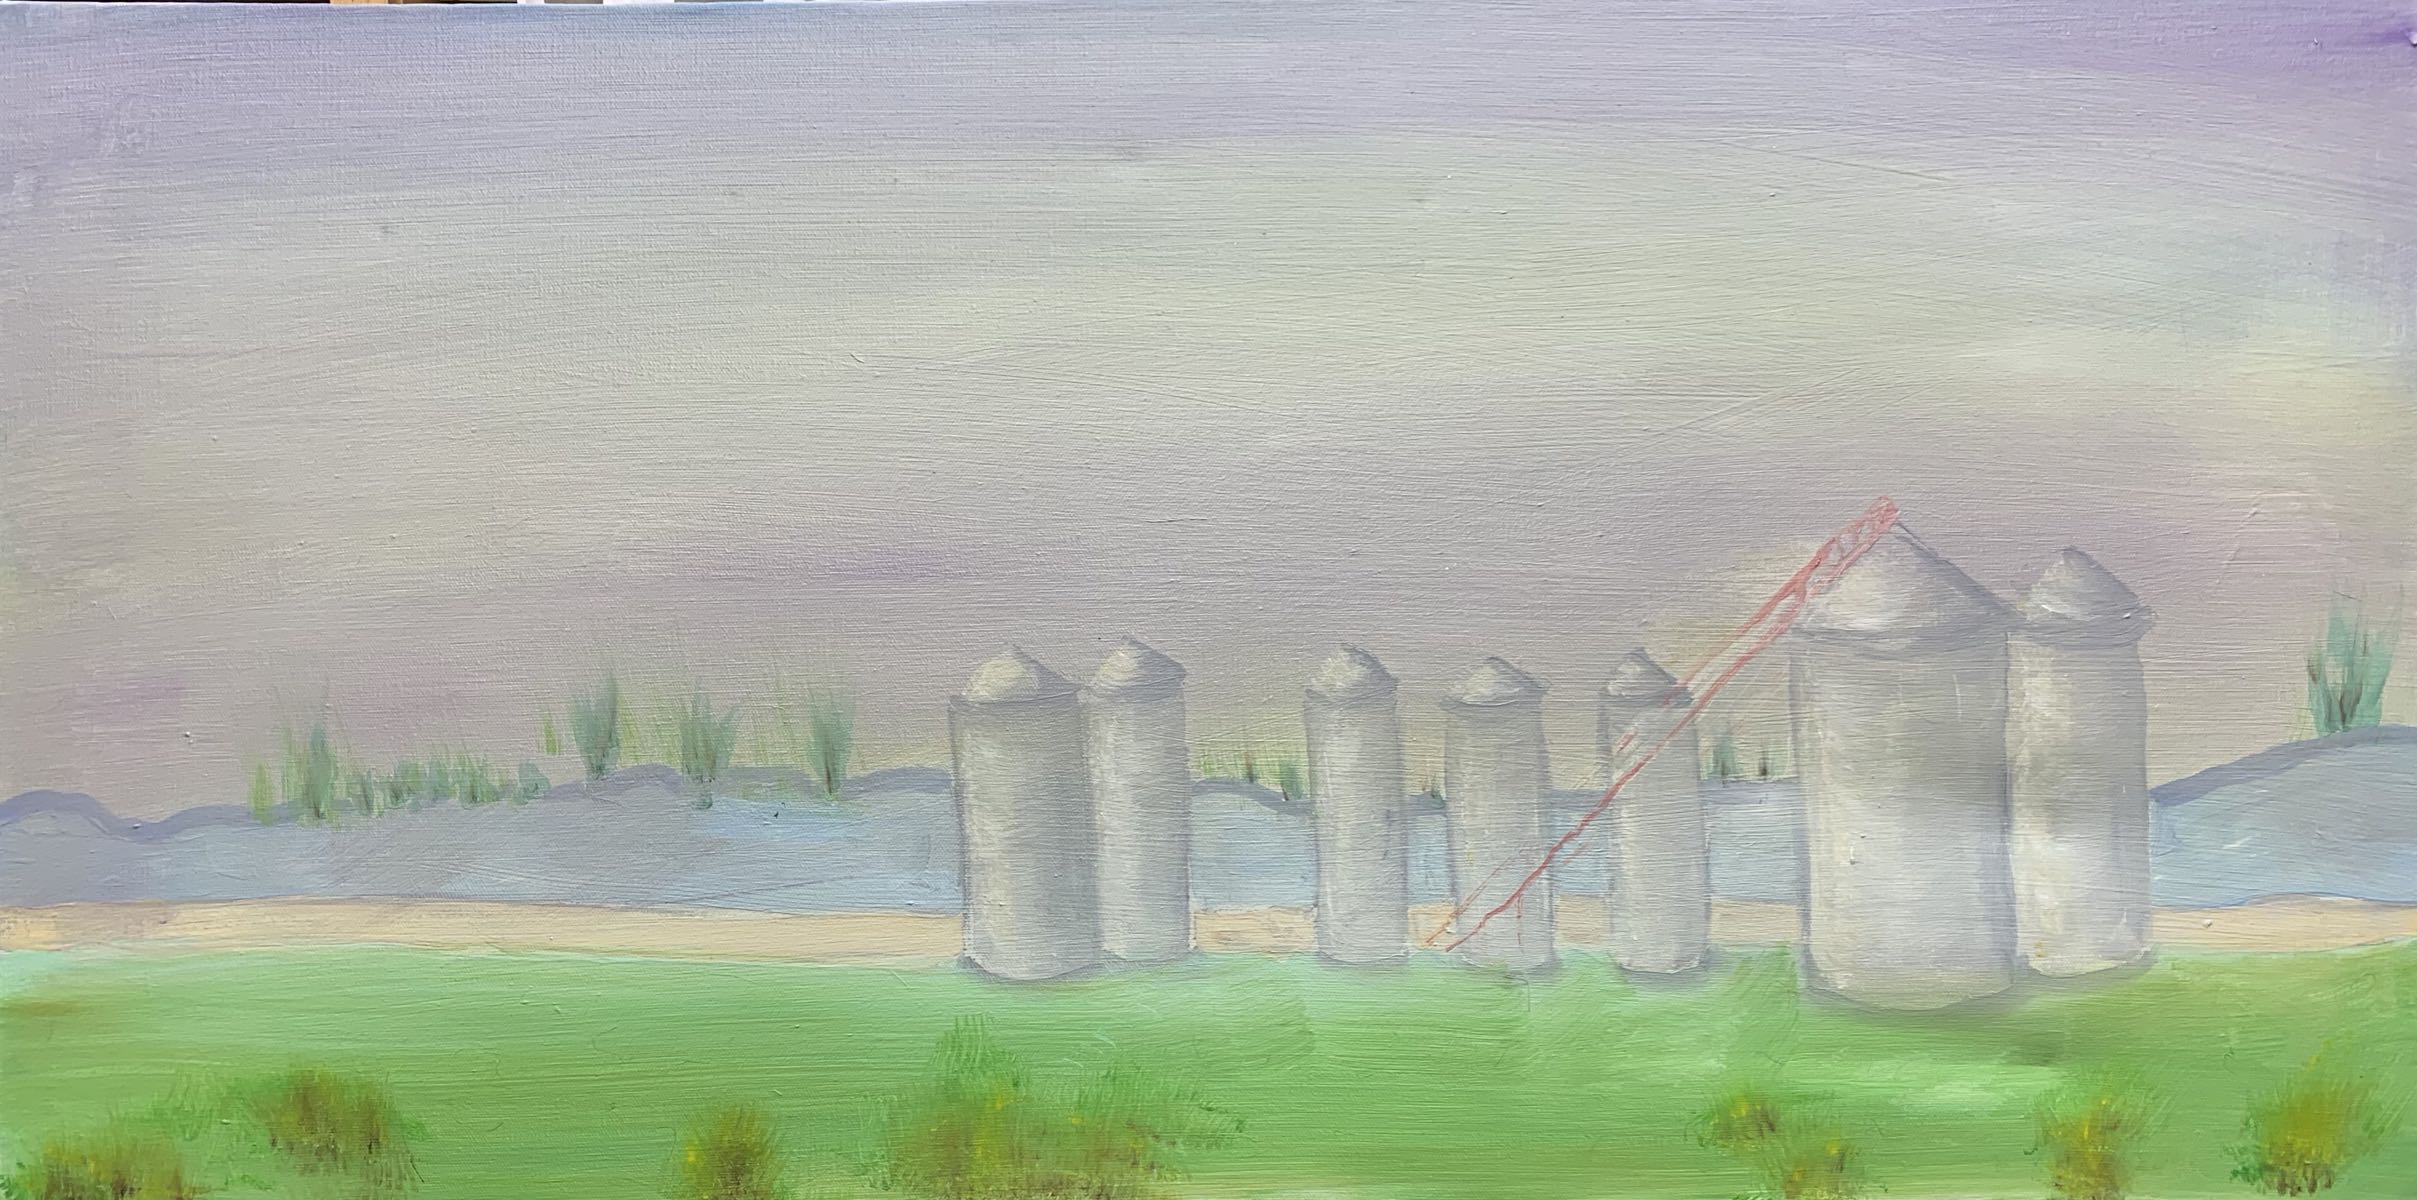 New town silos in fog - 50 inches x 19 inches - oil on canvas - $600